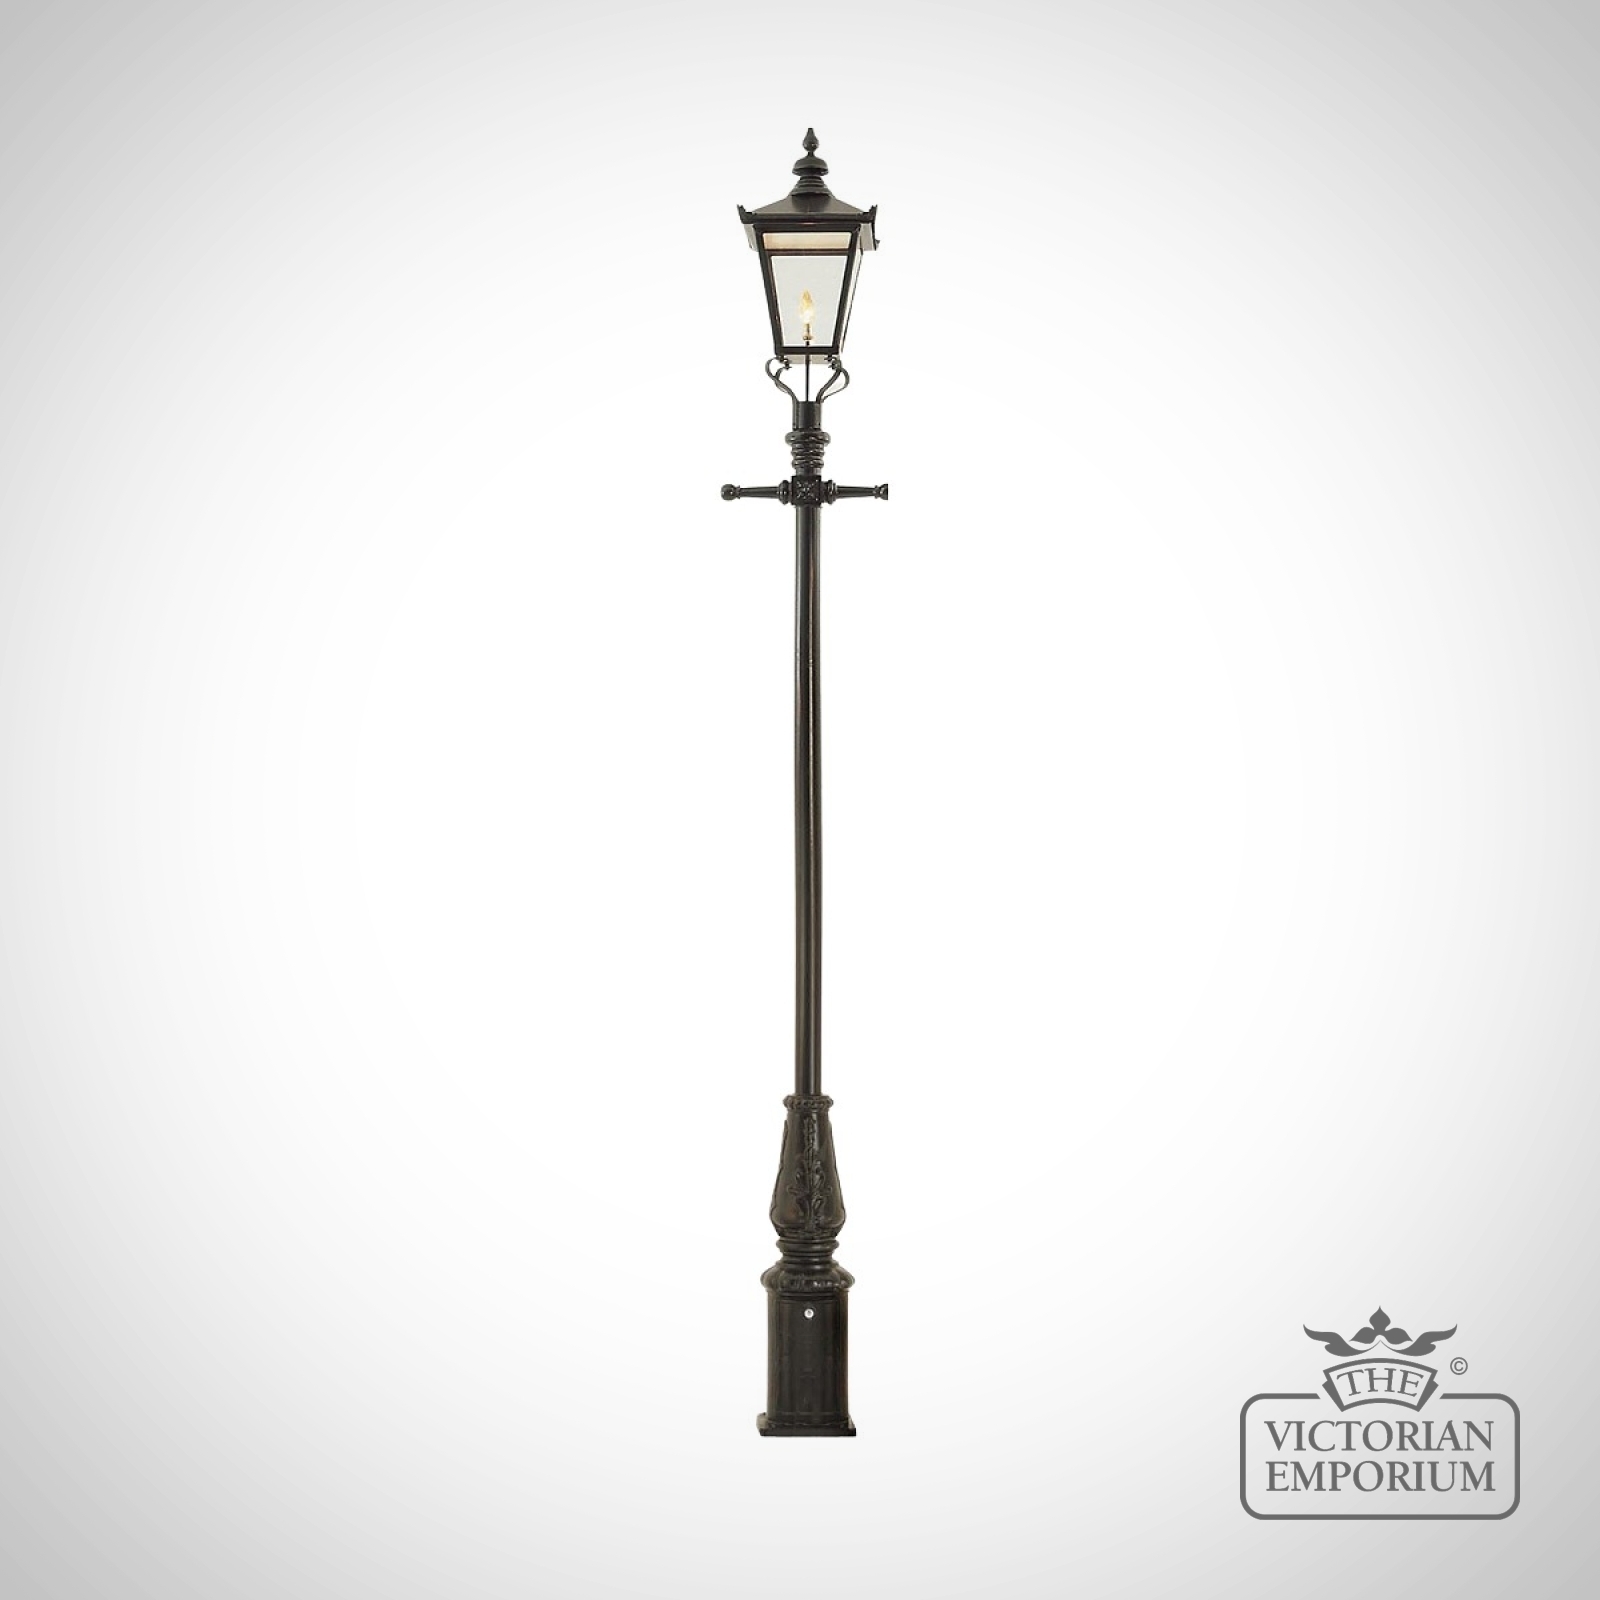 Lamp Post 3580mm High And Large Square Steel Lantern